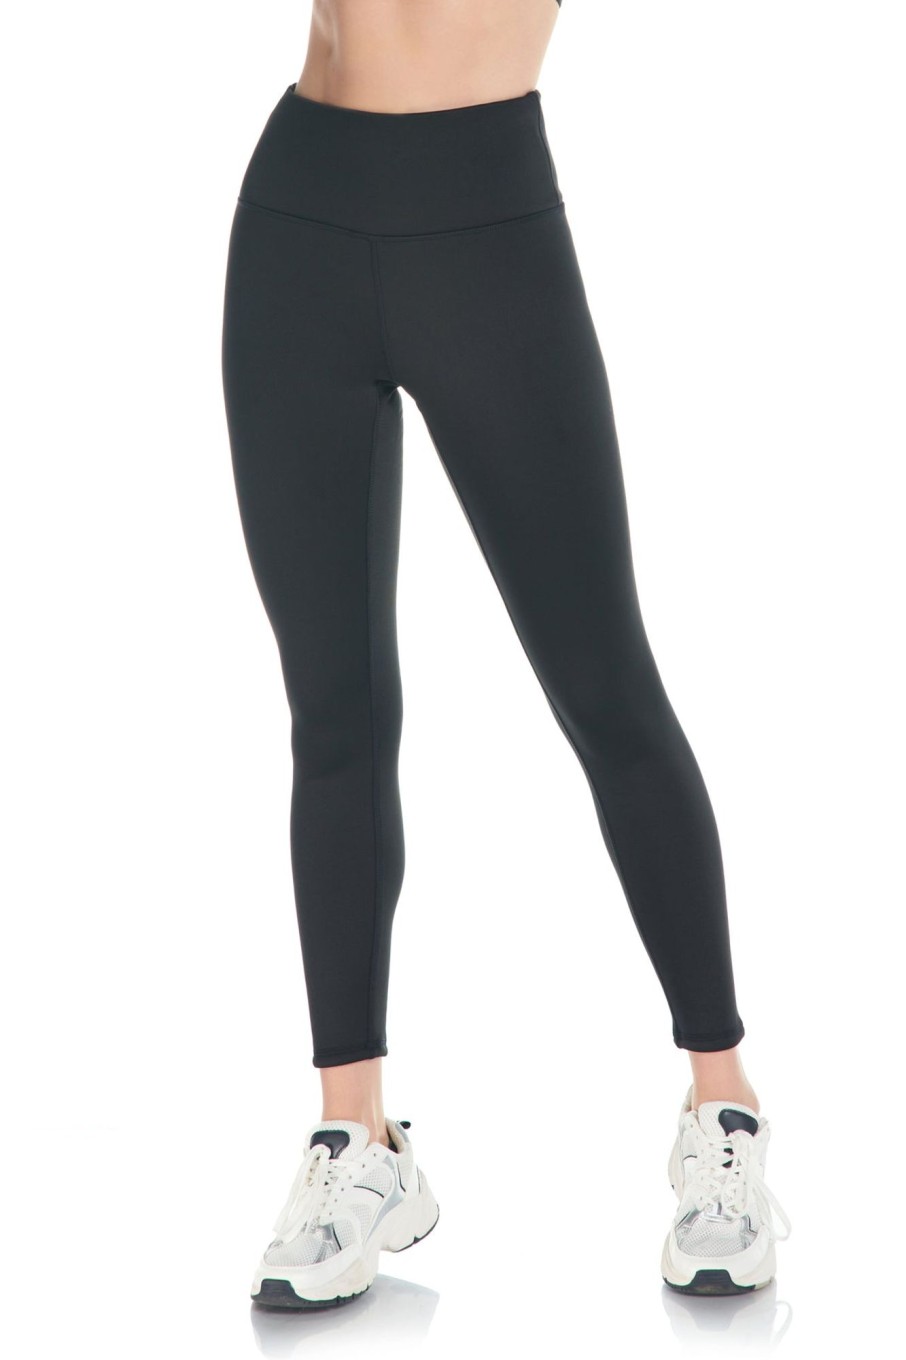 Yoga Fitness Sherpa Leggings - Clothing & Merch - by Beibei